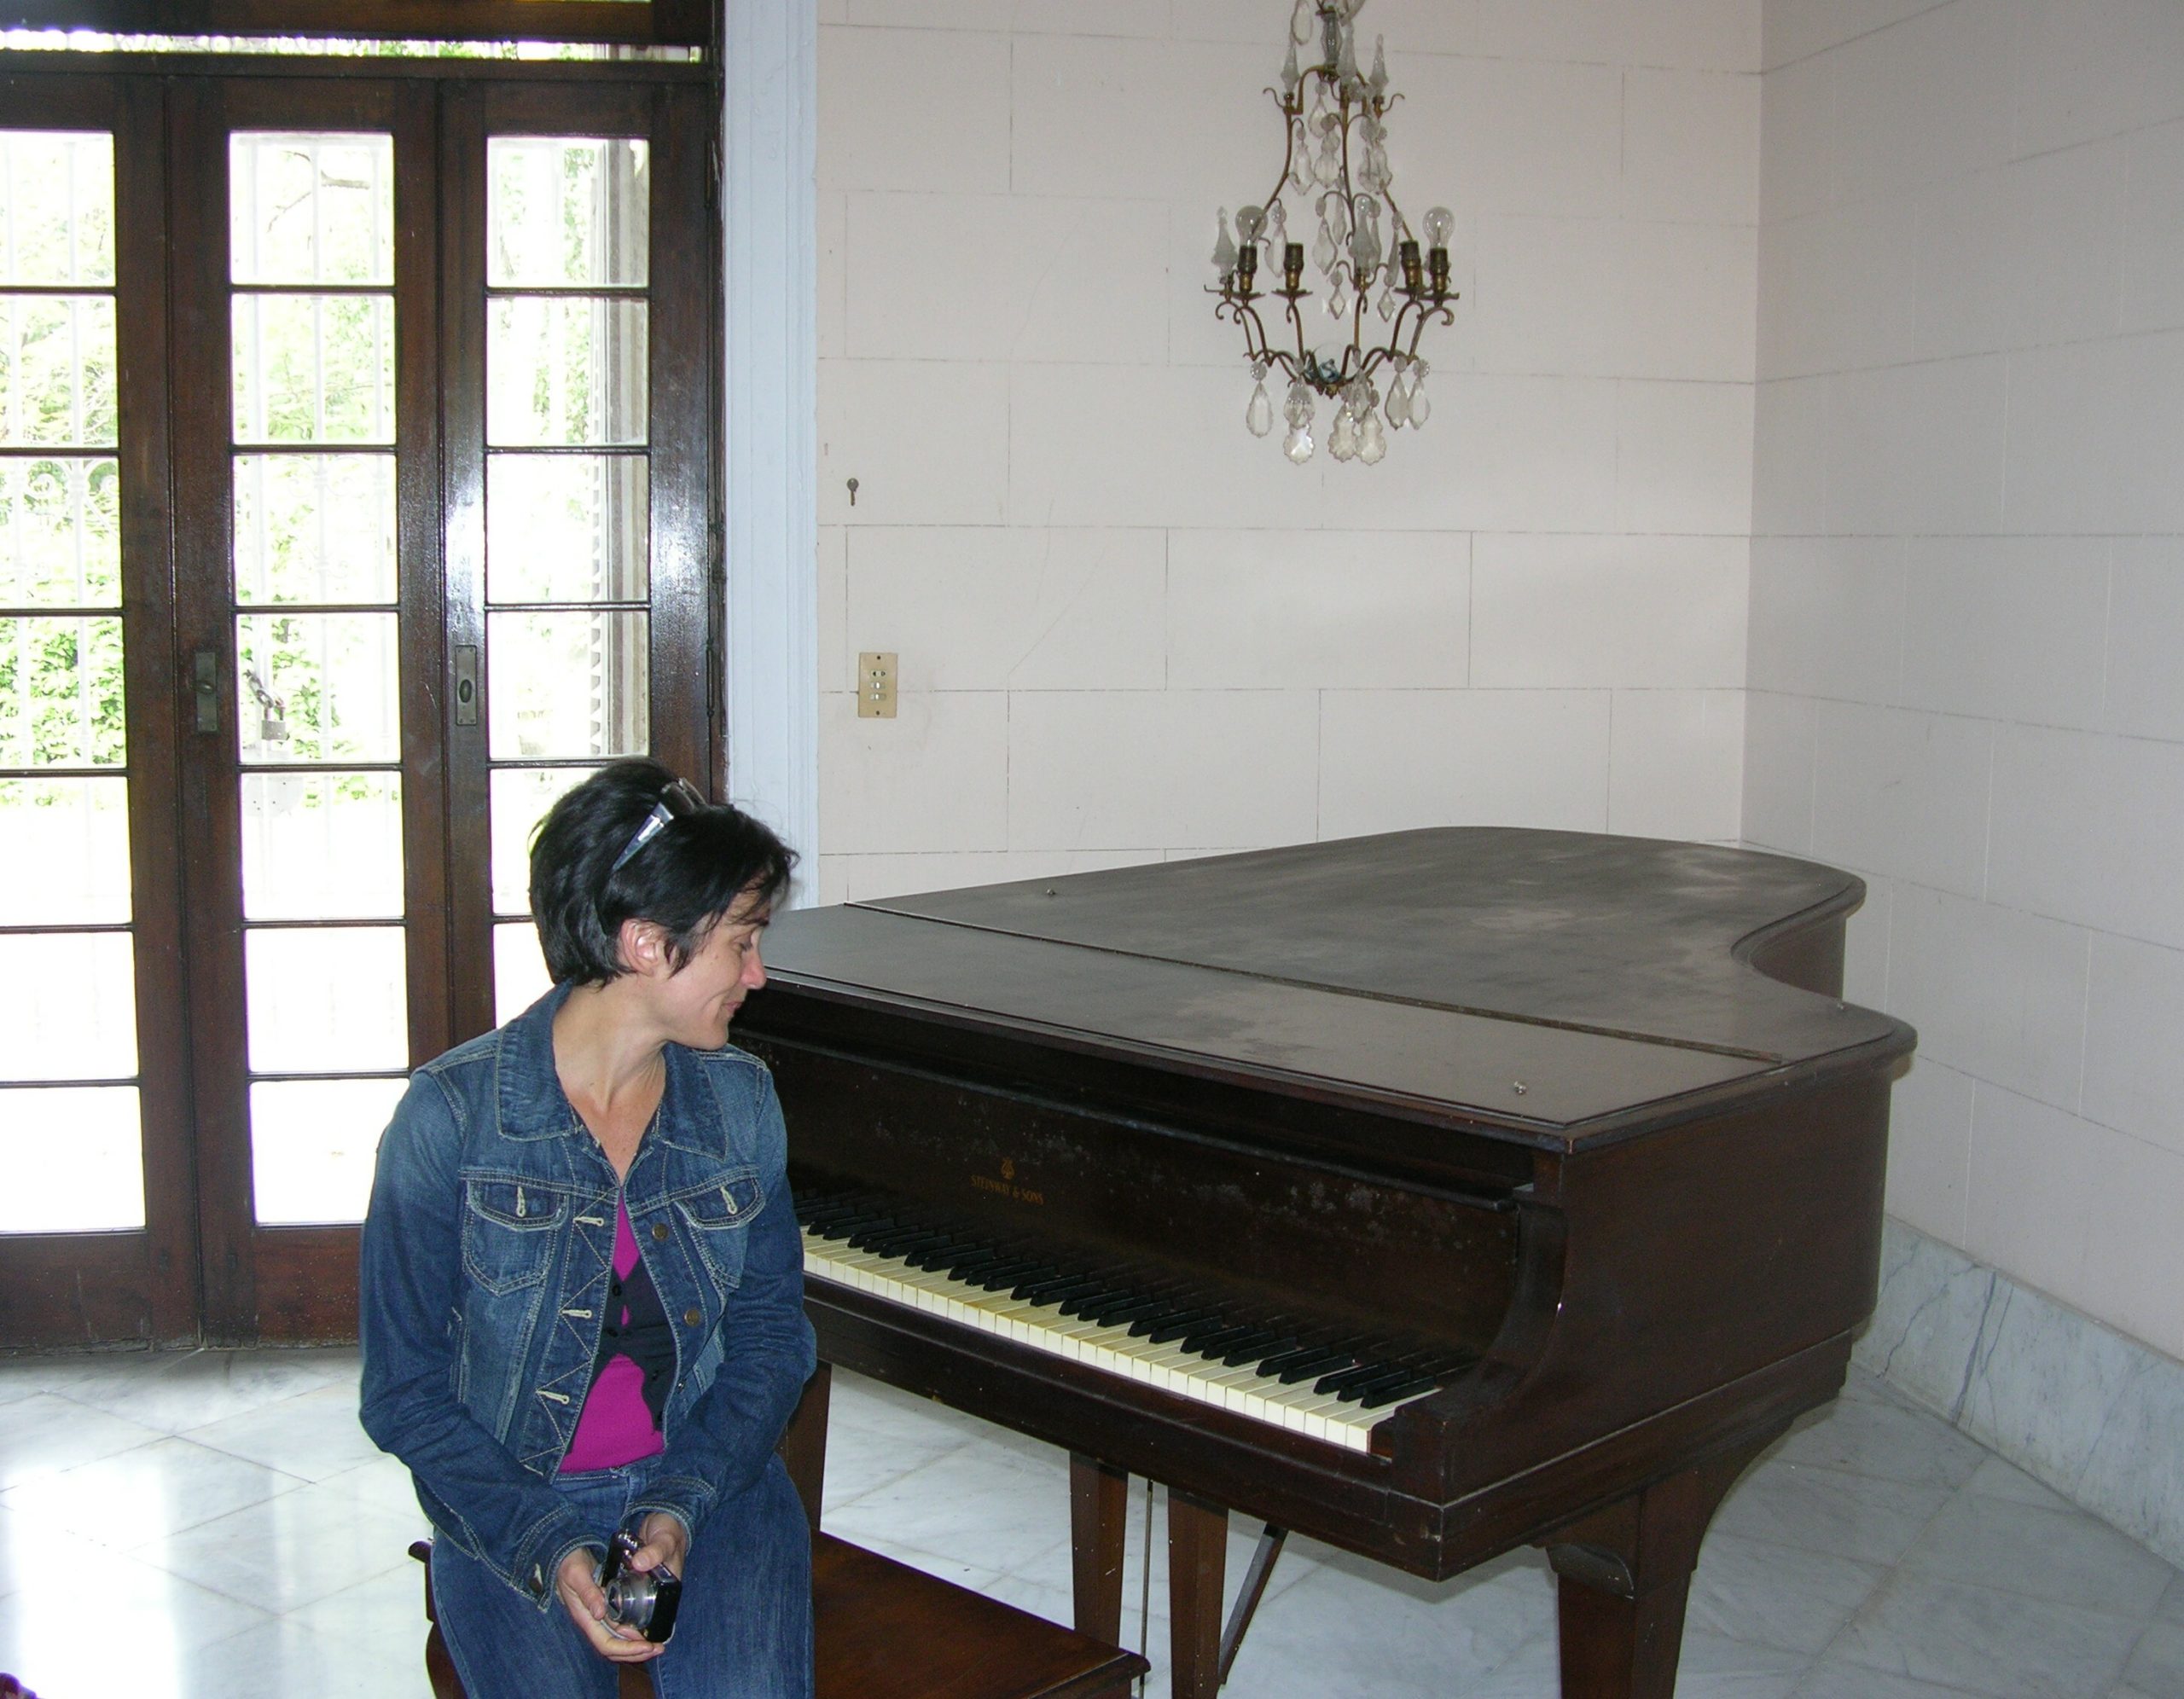 Adelaide Mestre in Cuba with the piano that once belonged to her late father, Luis Enrique Mestre. COURTESY ADELAIDE MESTRE